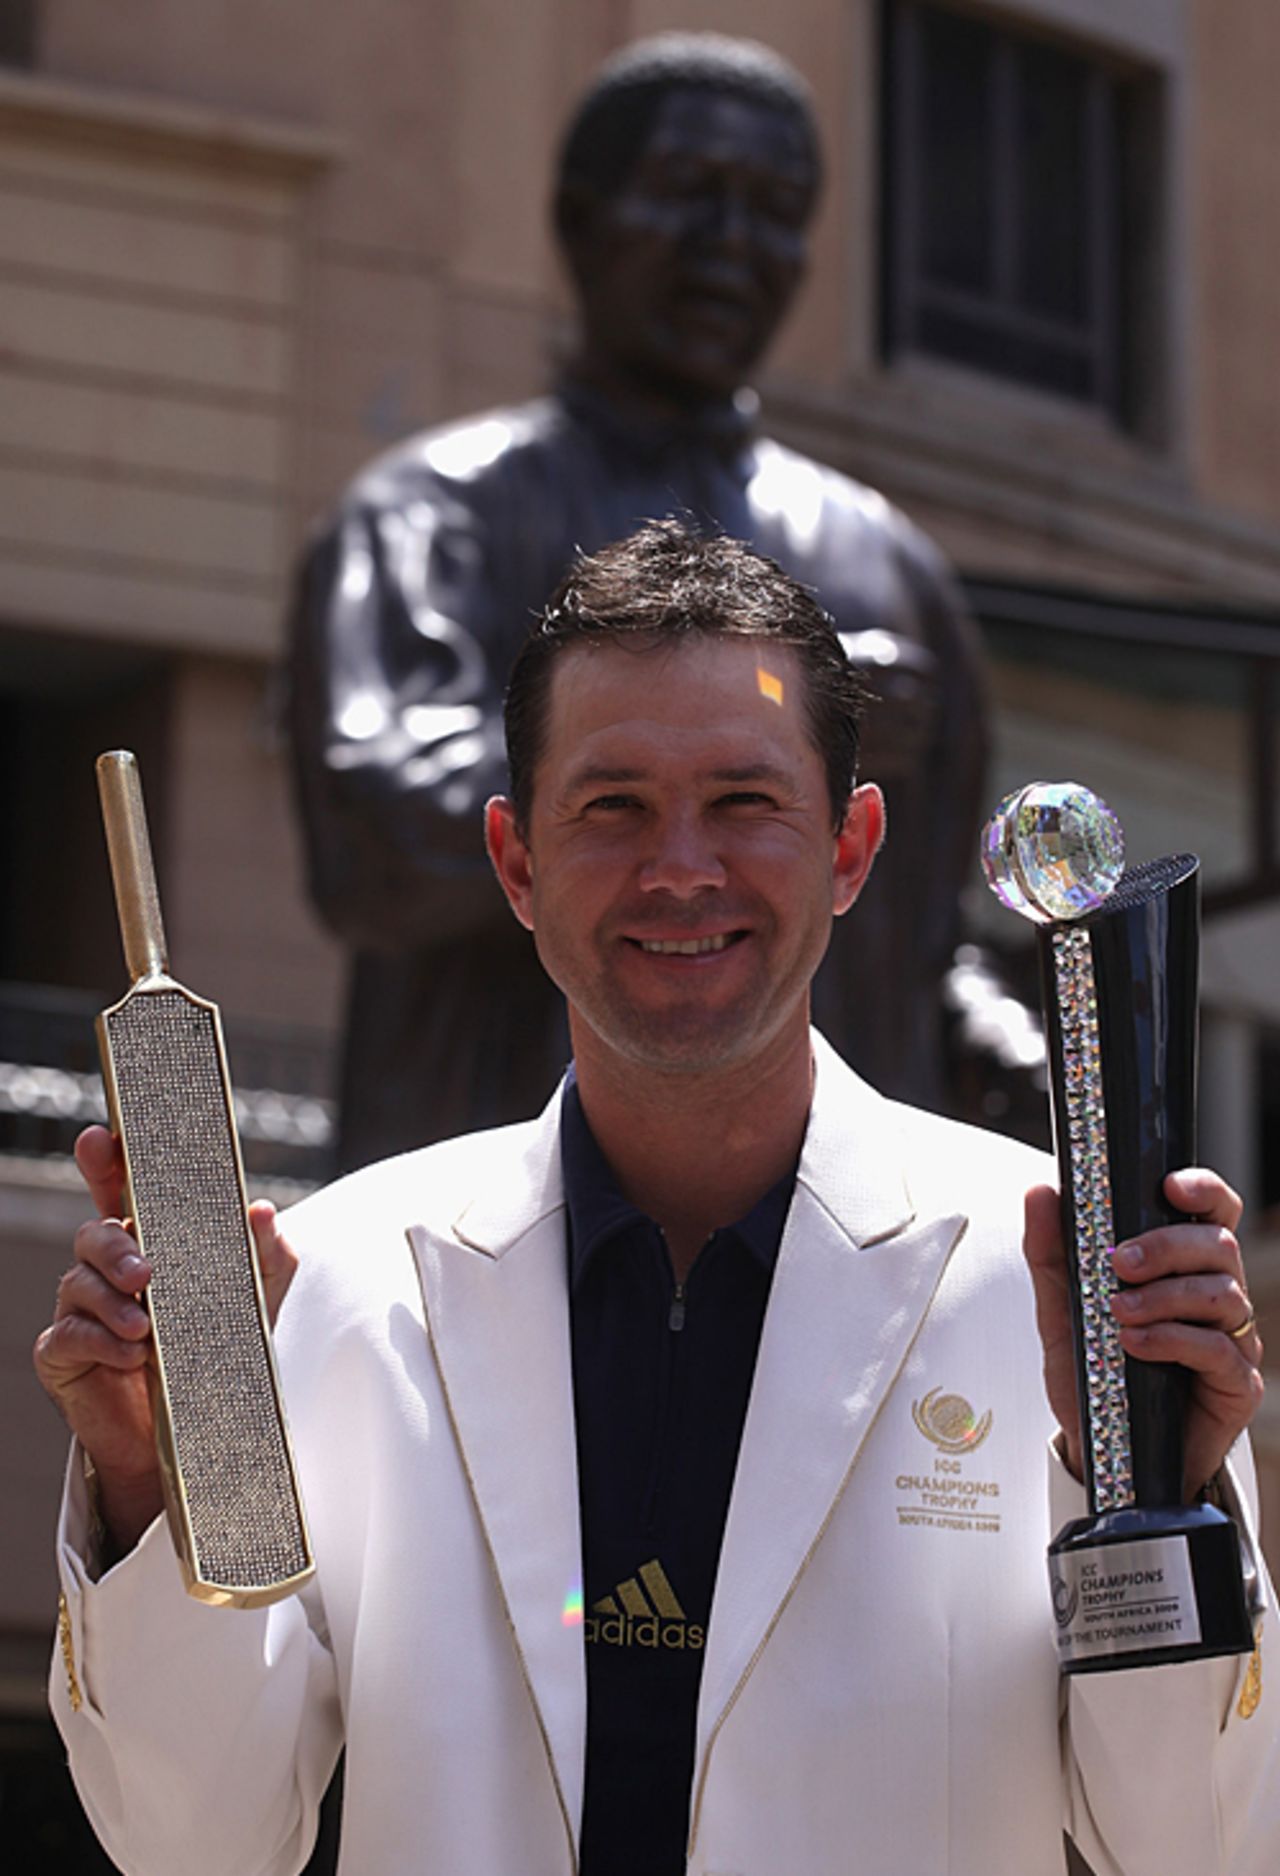 Ricky Ponting with the Player of the Series award and Golden bat at the Nelson Mandela Square, Johannesburg, October 6, 2009